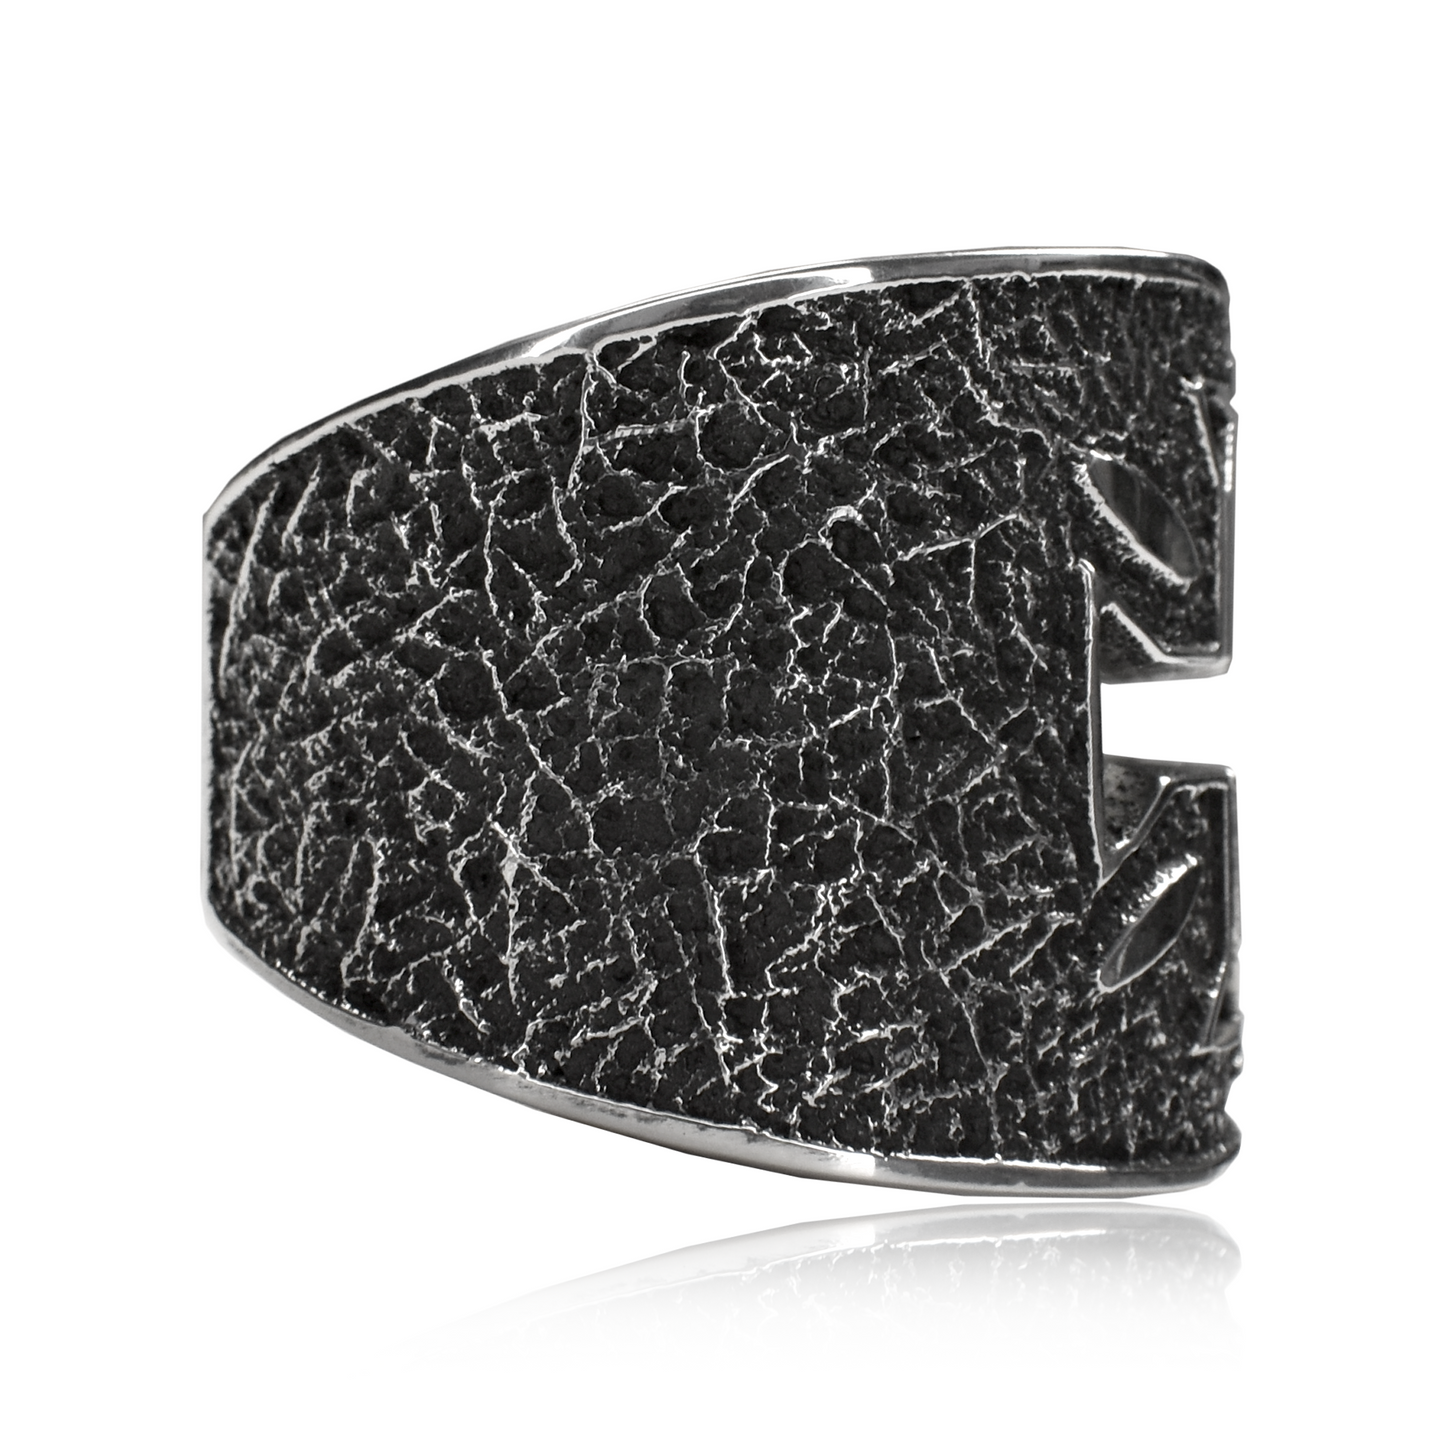 Tufa Cast Dragonfly Cross Sterling Silver Cuff by Aaron Anderson